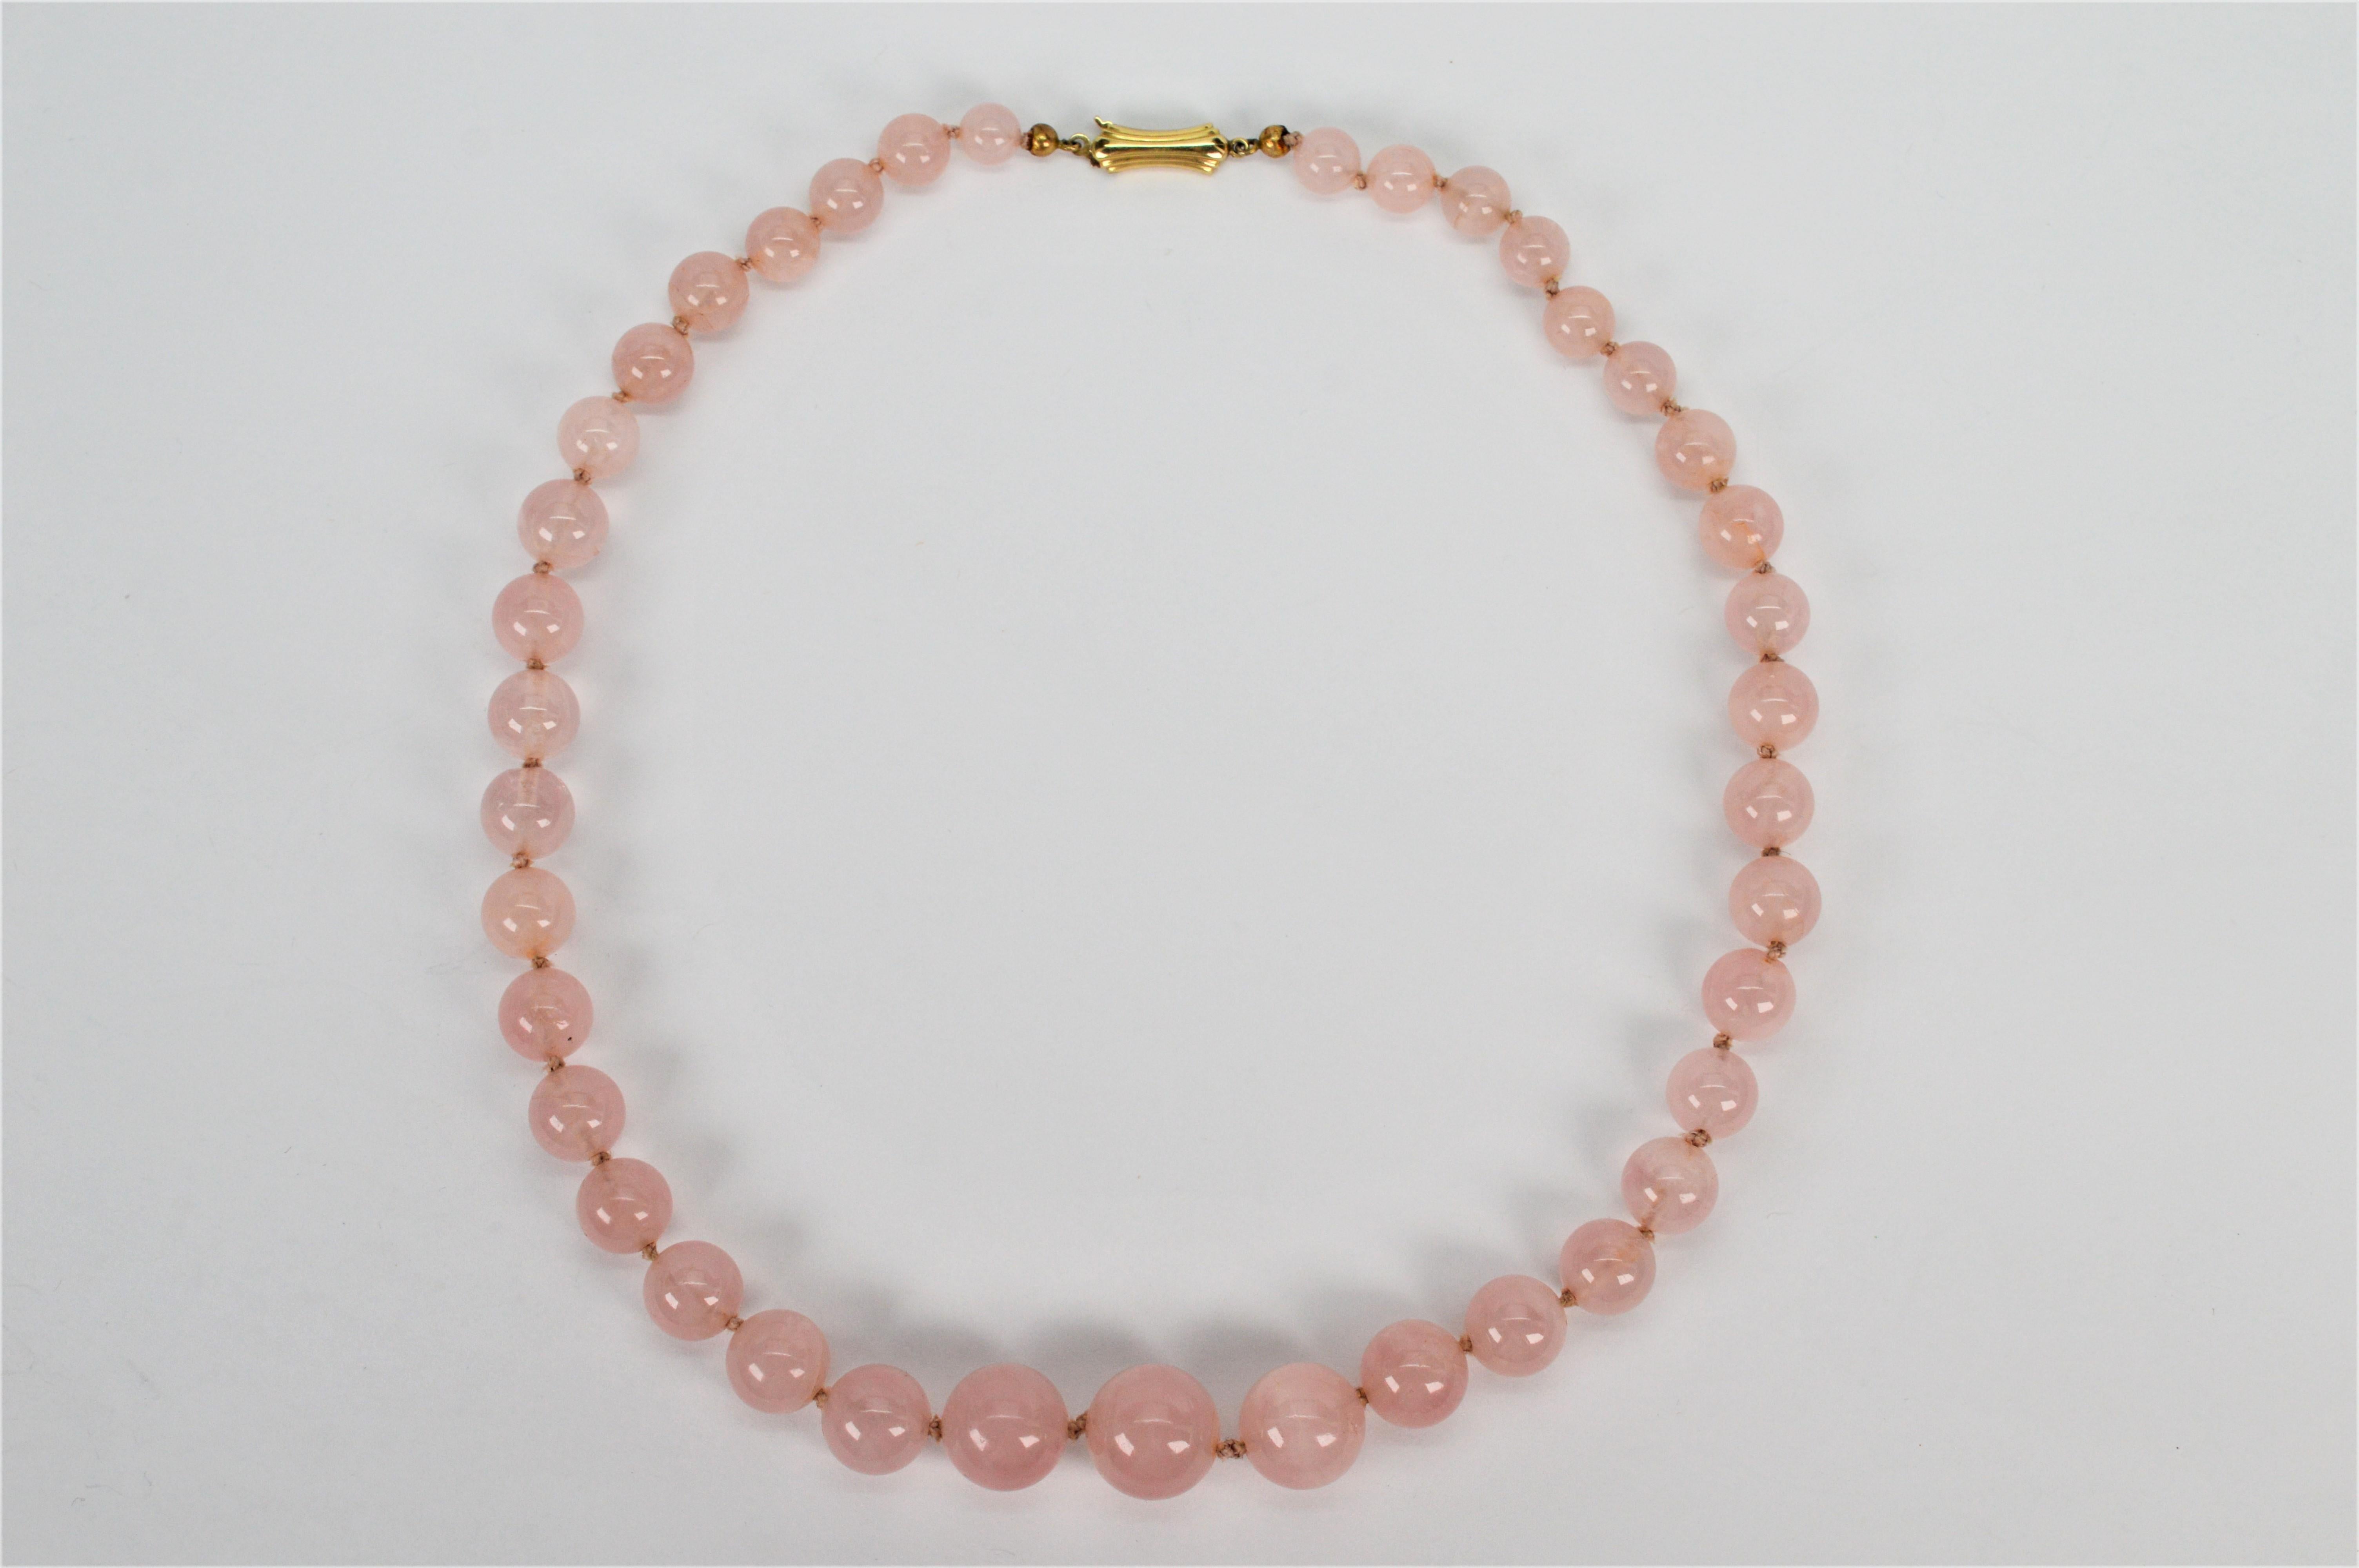 Graduated round beads of blush color natural rose quartz create this lovely vintage beaded necklace. Thirty nine round soft pink stones ranging from 6.6mm to 13.2mm are hand knotted on the original silk strand to create its 16 inch length. A period